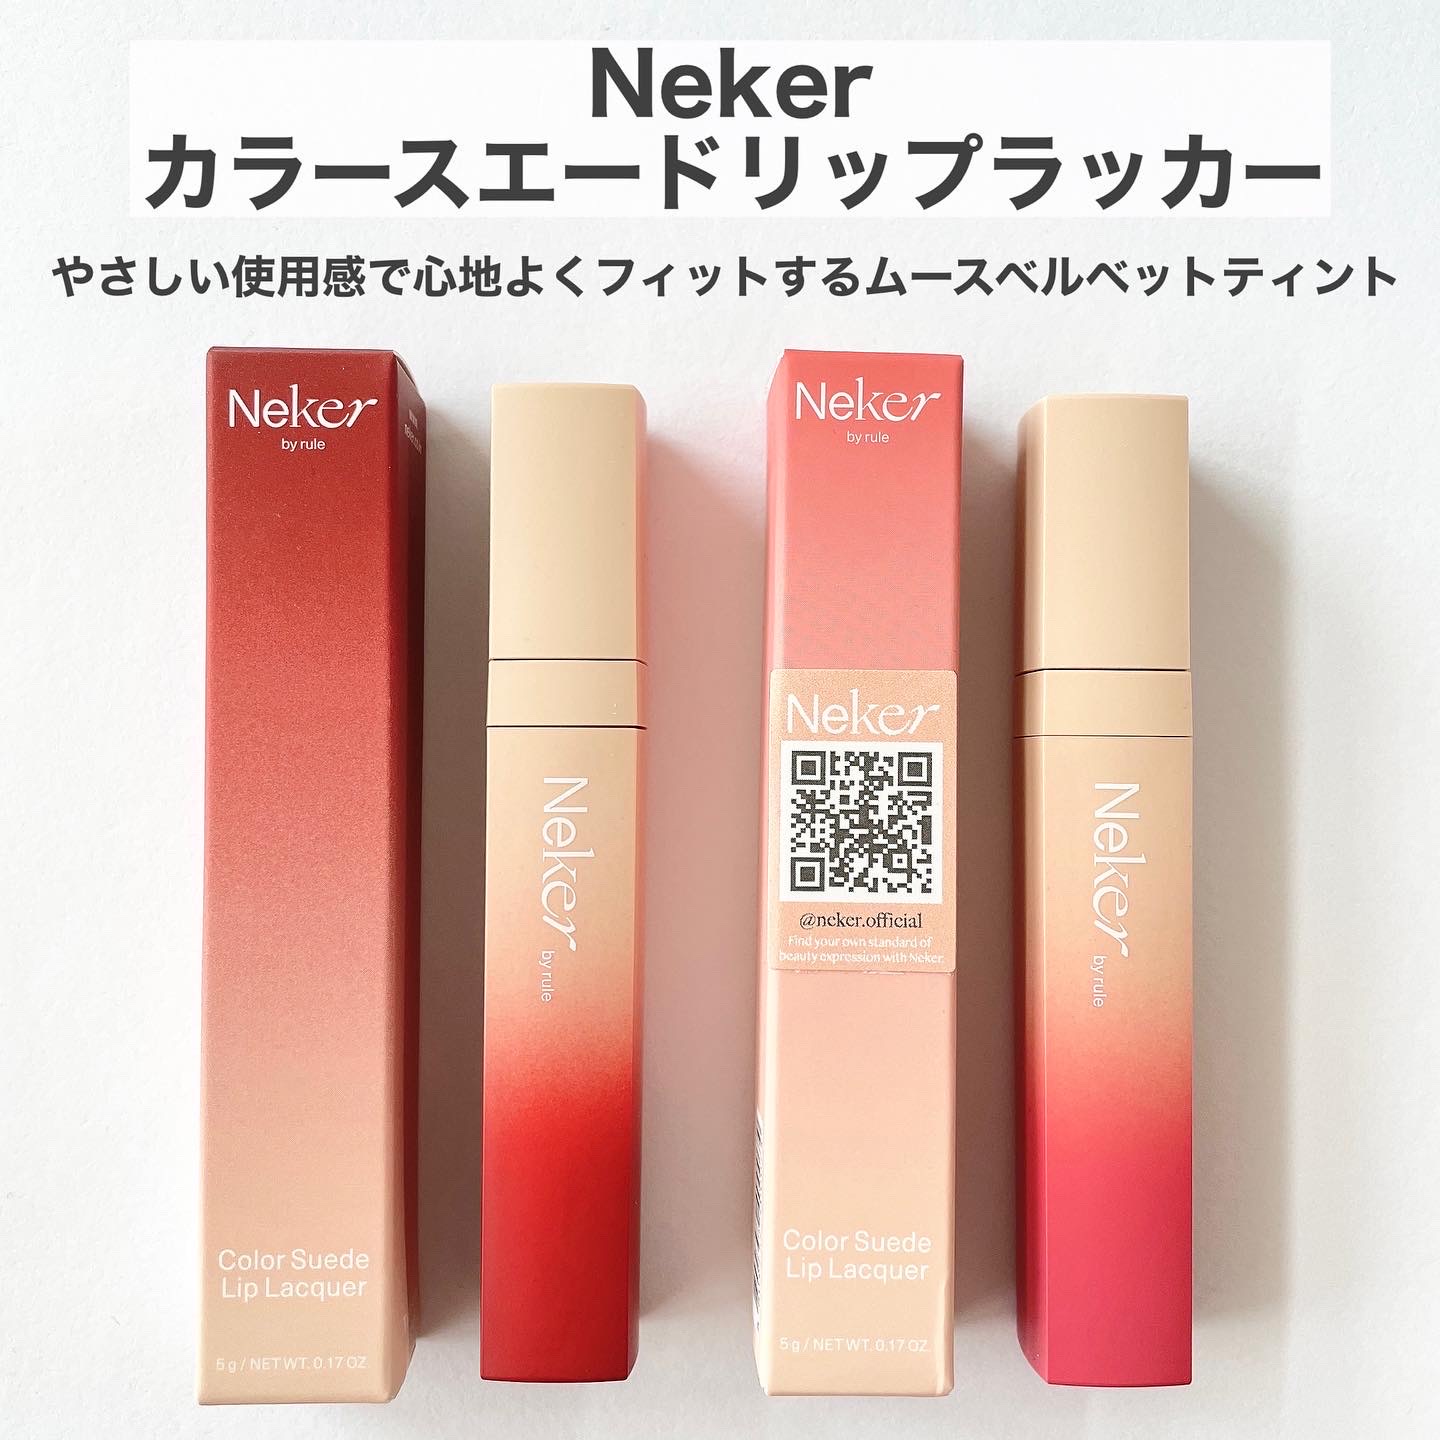 Neker / Color Suede Lip Lacquerの商品情報｜美容・化粧品情報は